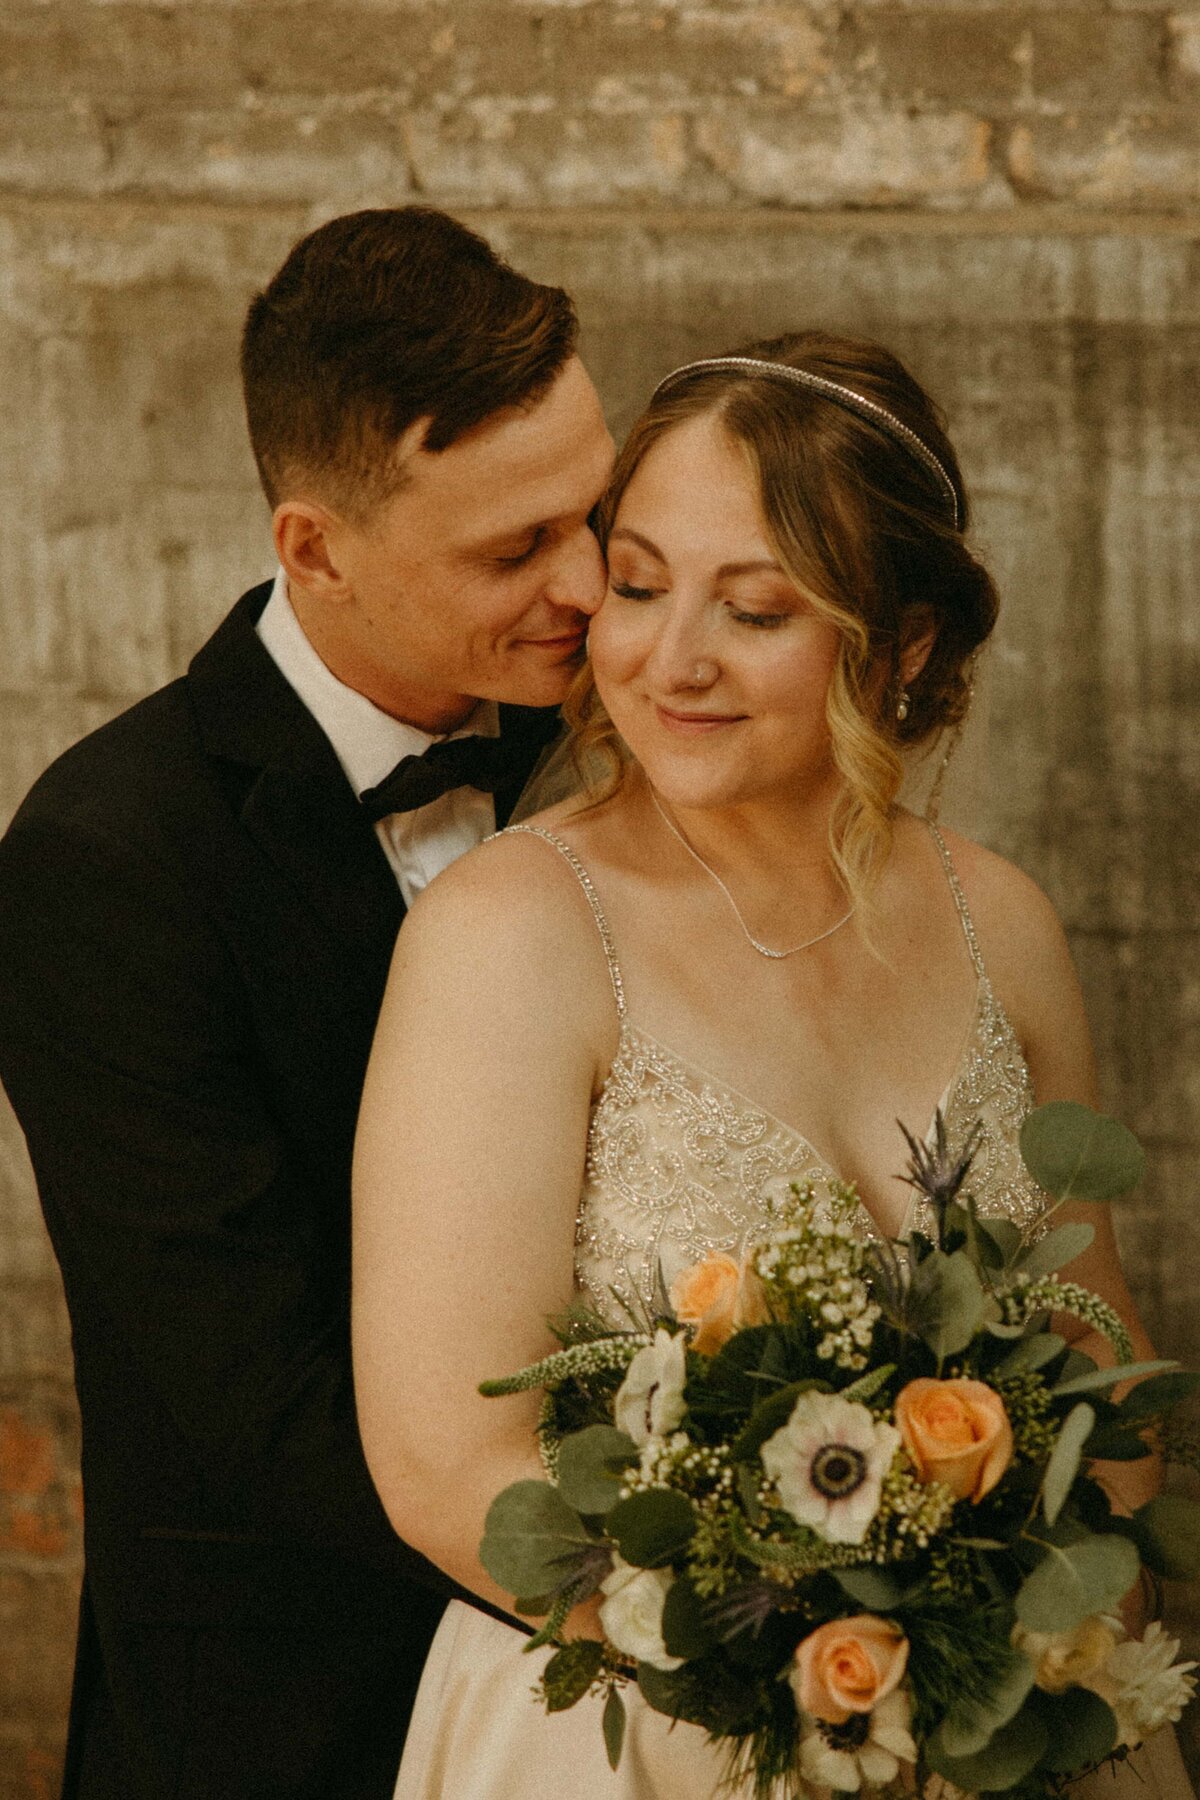 A bride and groom affectionately embracing, with the bride holding a bouquet of flowers, against a rustic brick wall background at Park Farm Winery.